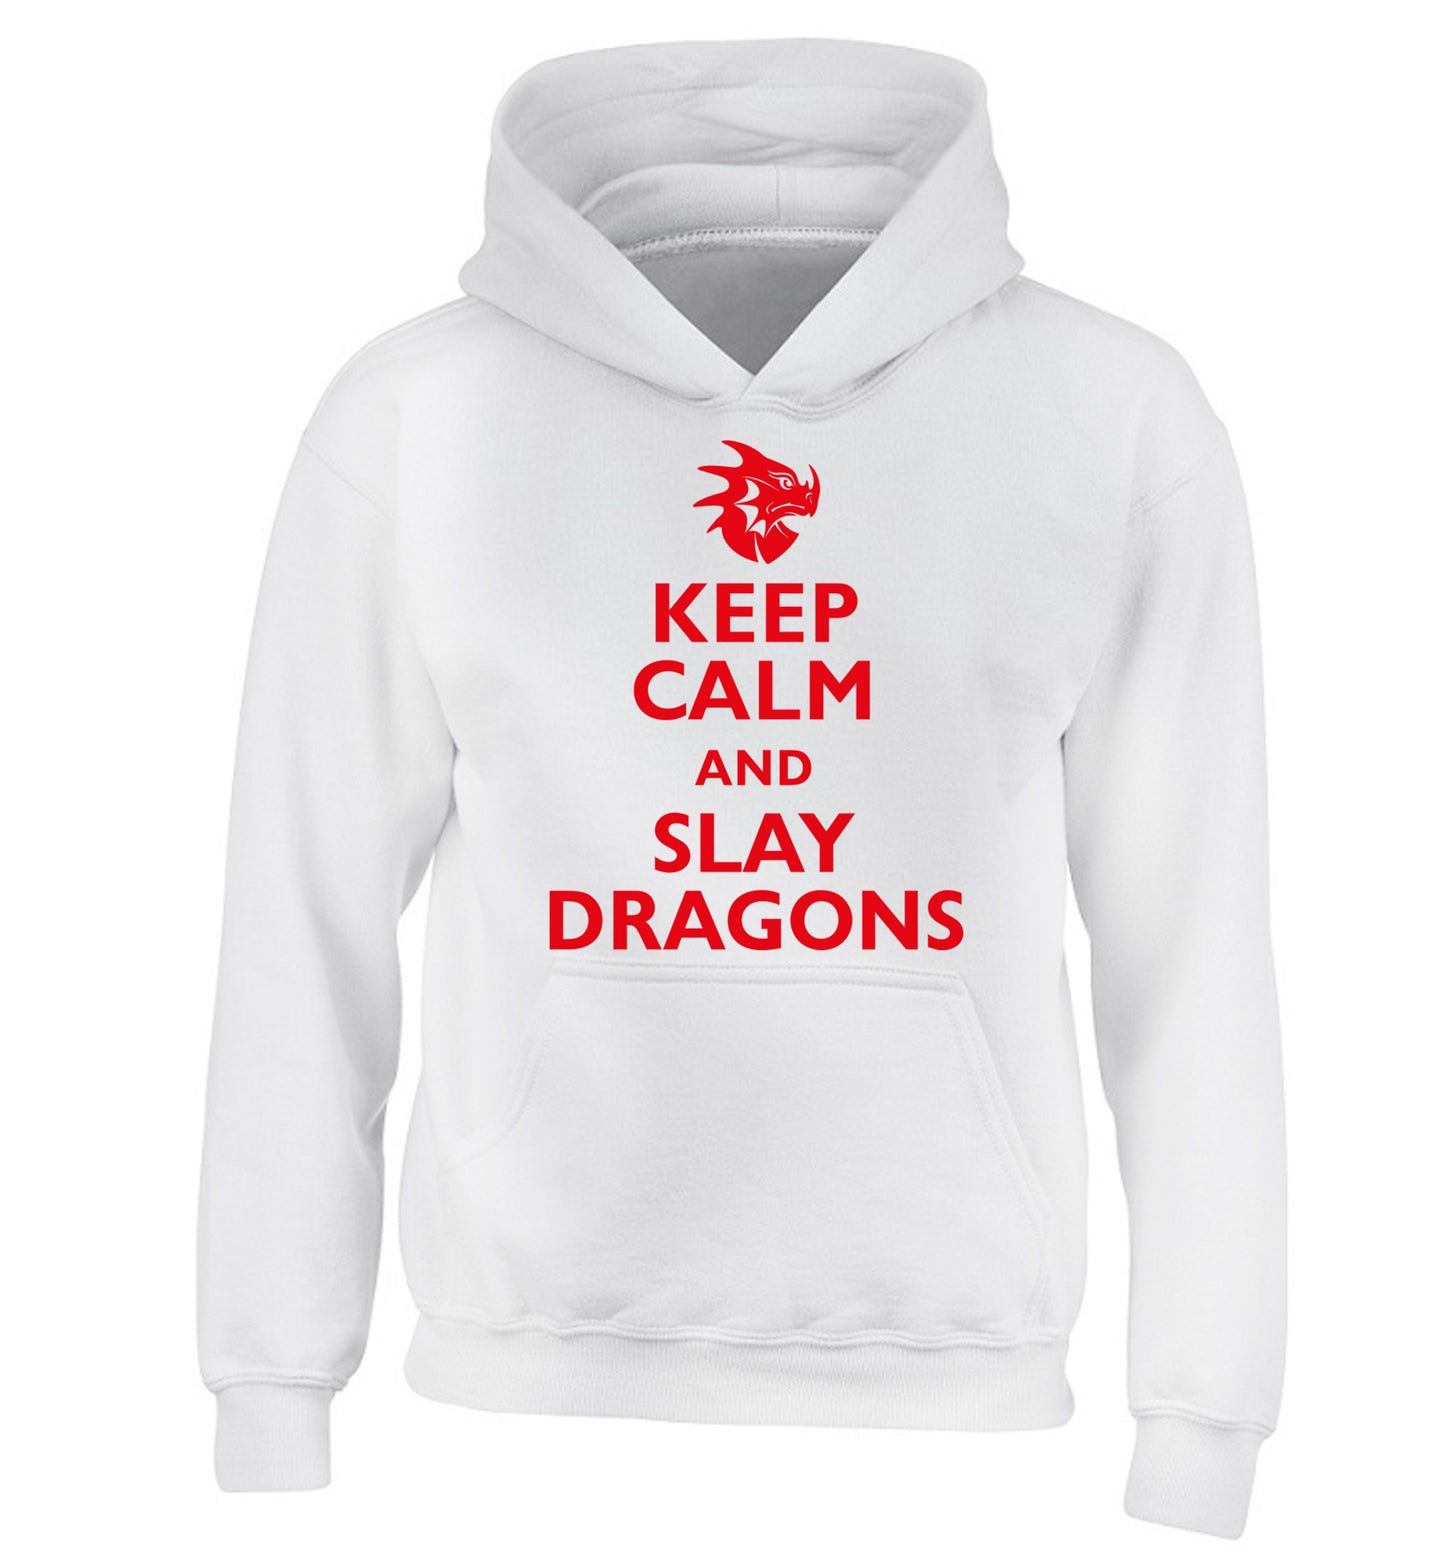 Keep calm and slay dragons children's white hoodie 12-14 Years